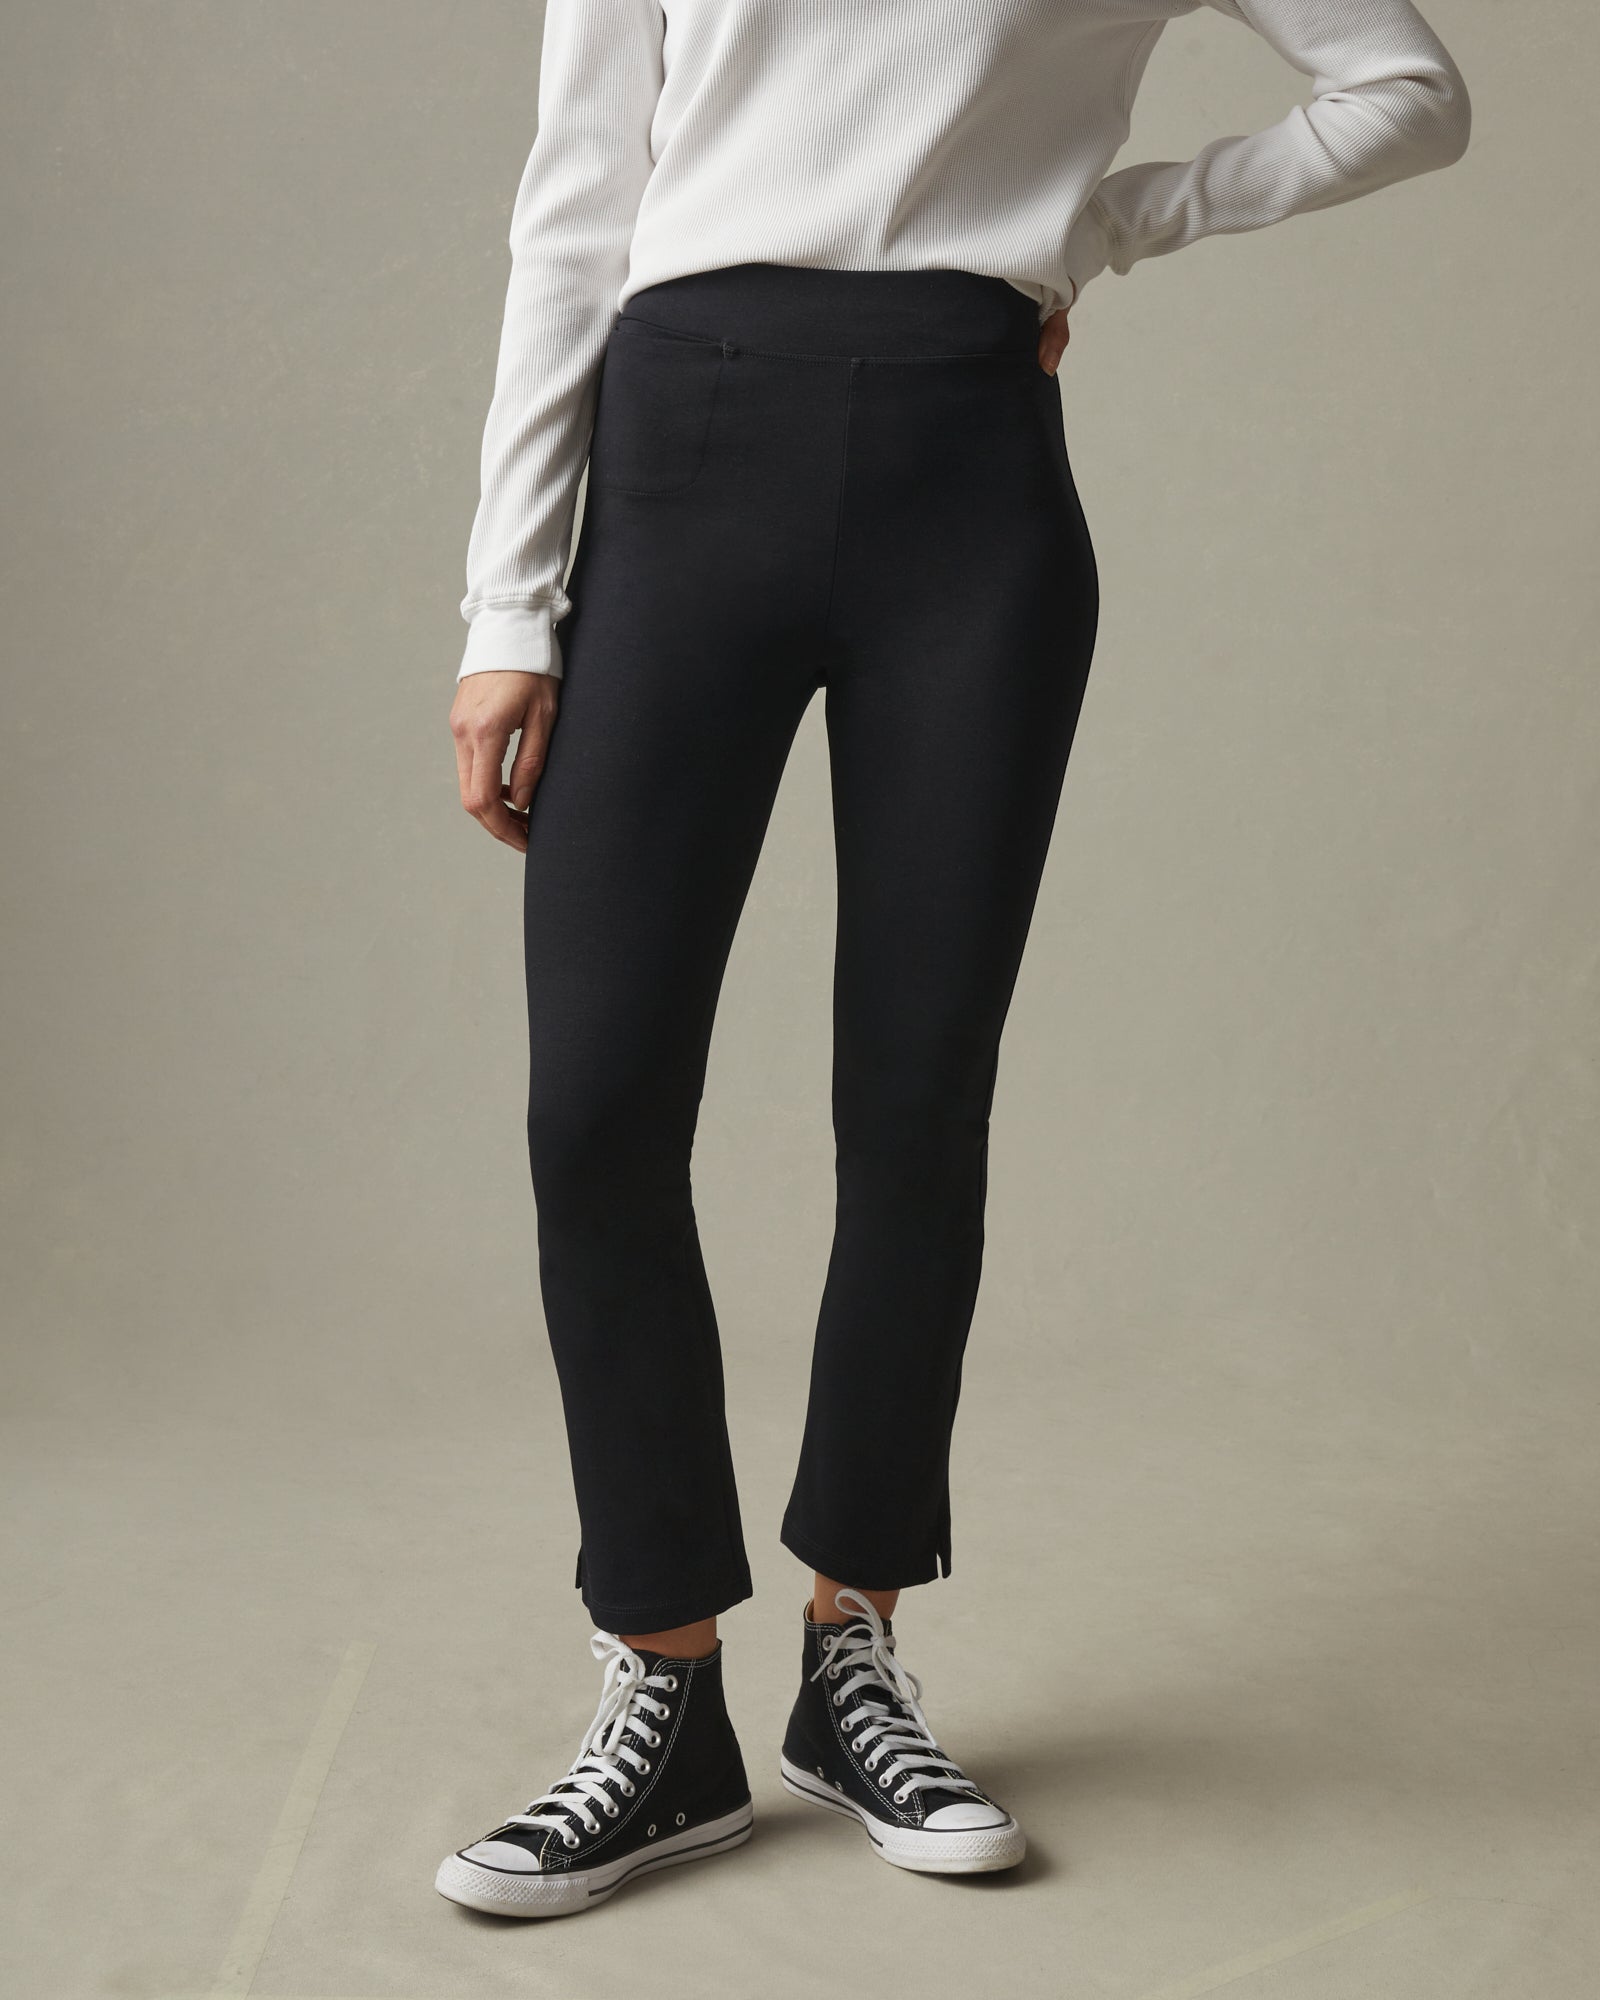 Double Knit Stitched Crease Pants